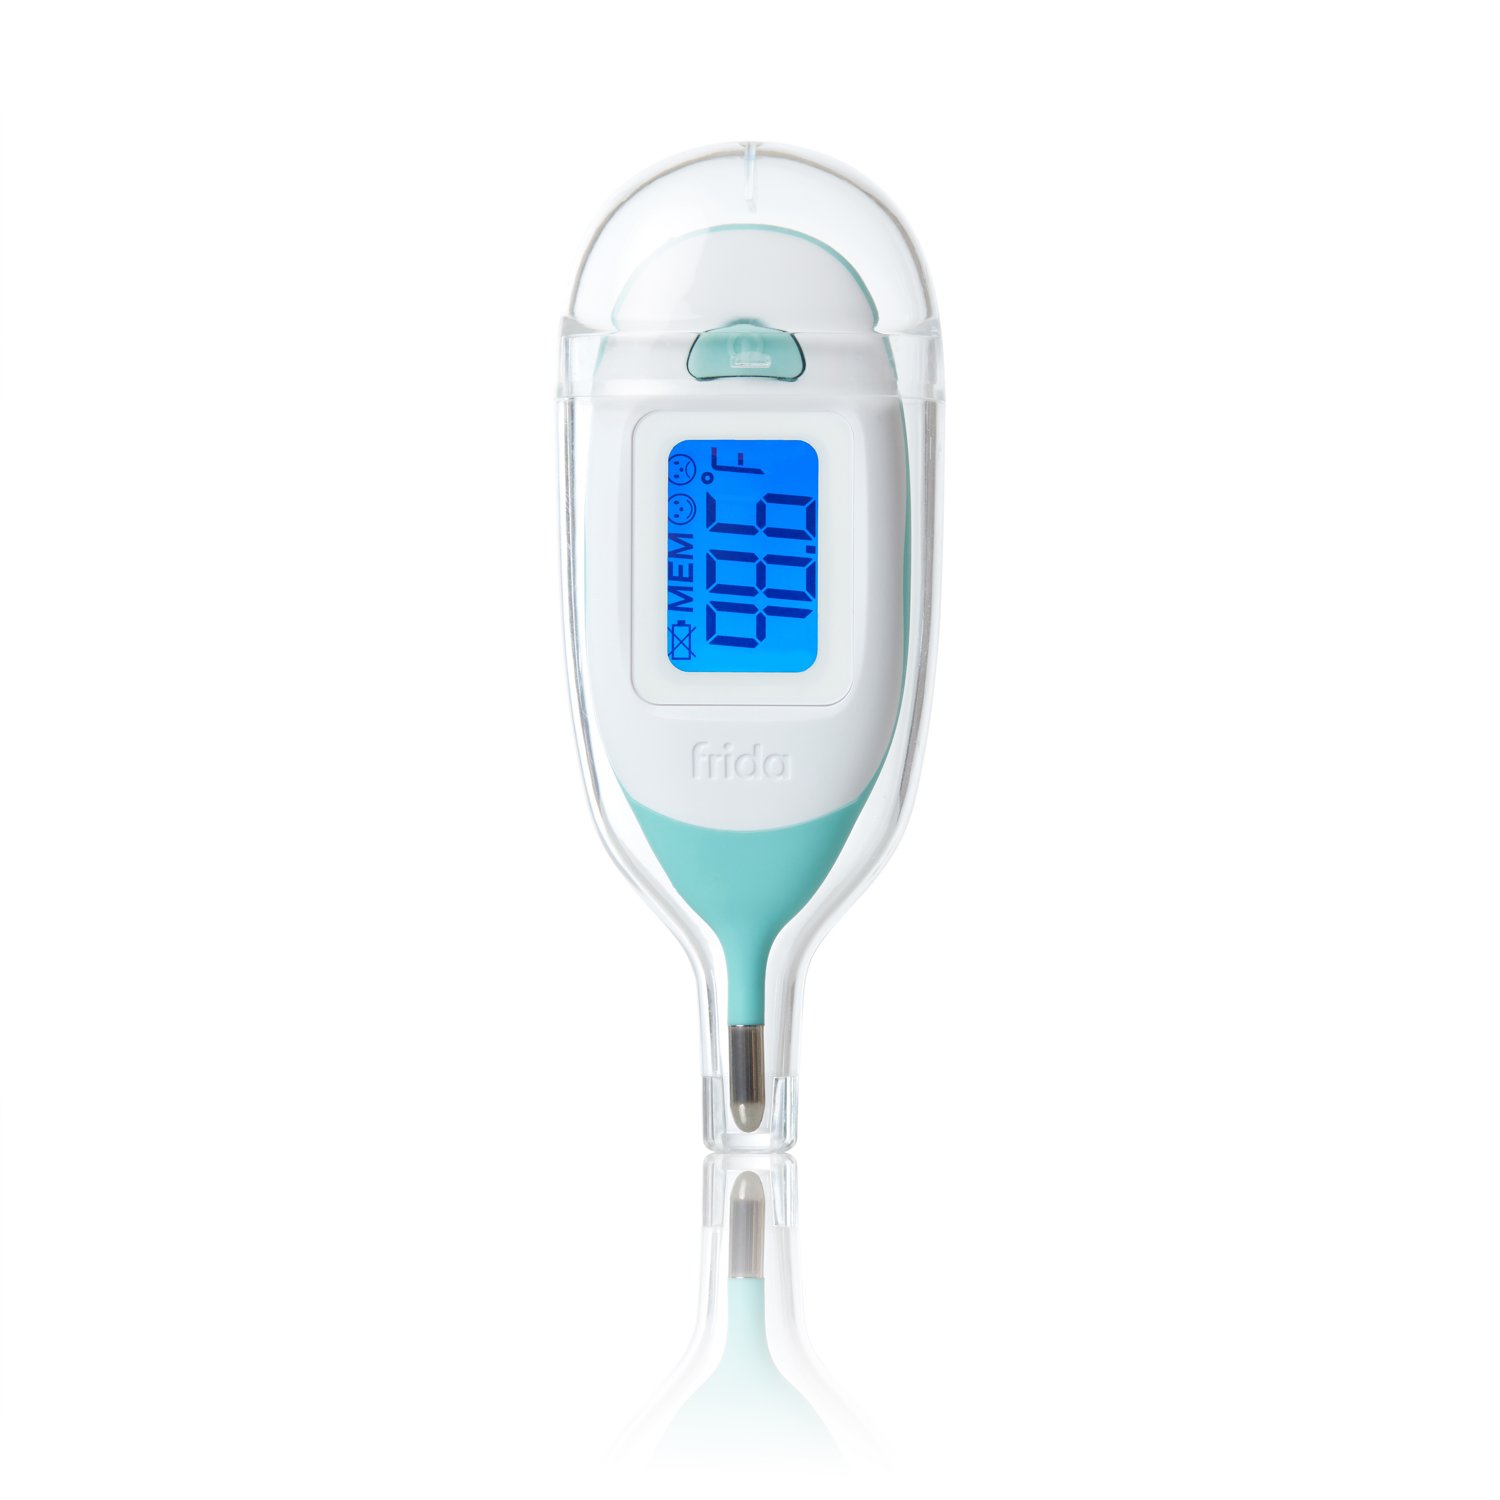 Frida Baby Quick-Read Digital Rectal Thermometer for Accurate Infant Temperature Readings - image 3 of 11